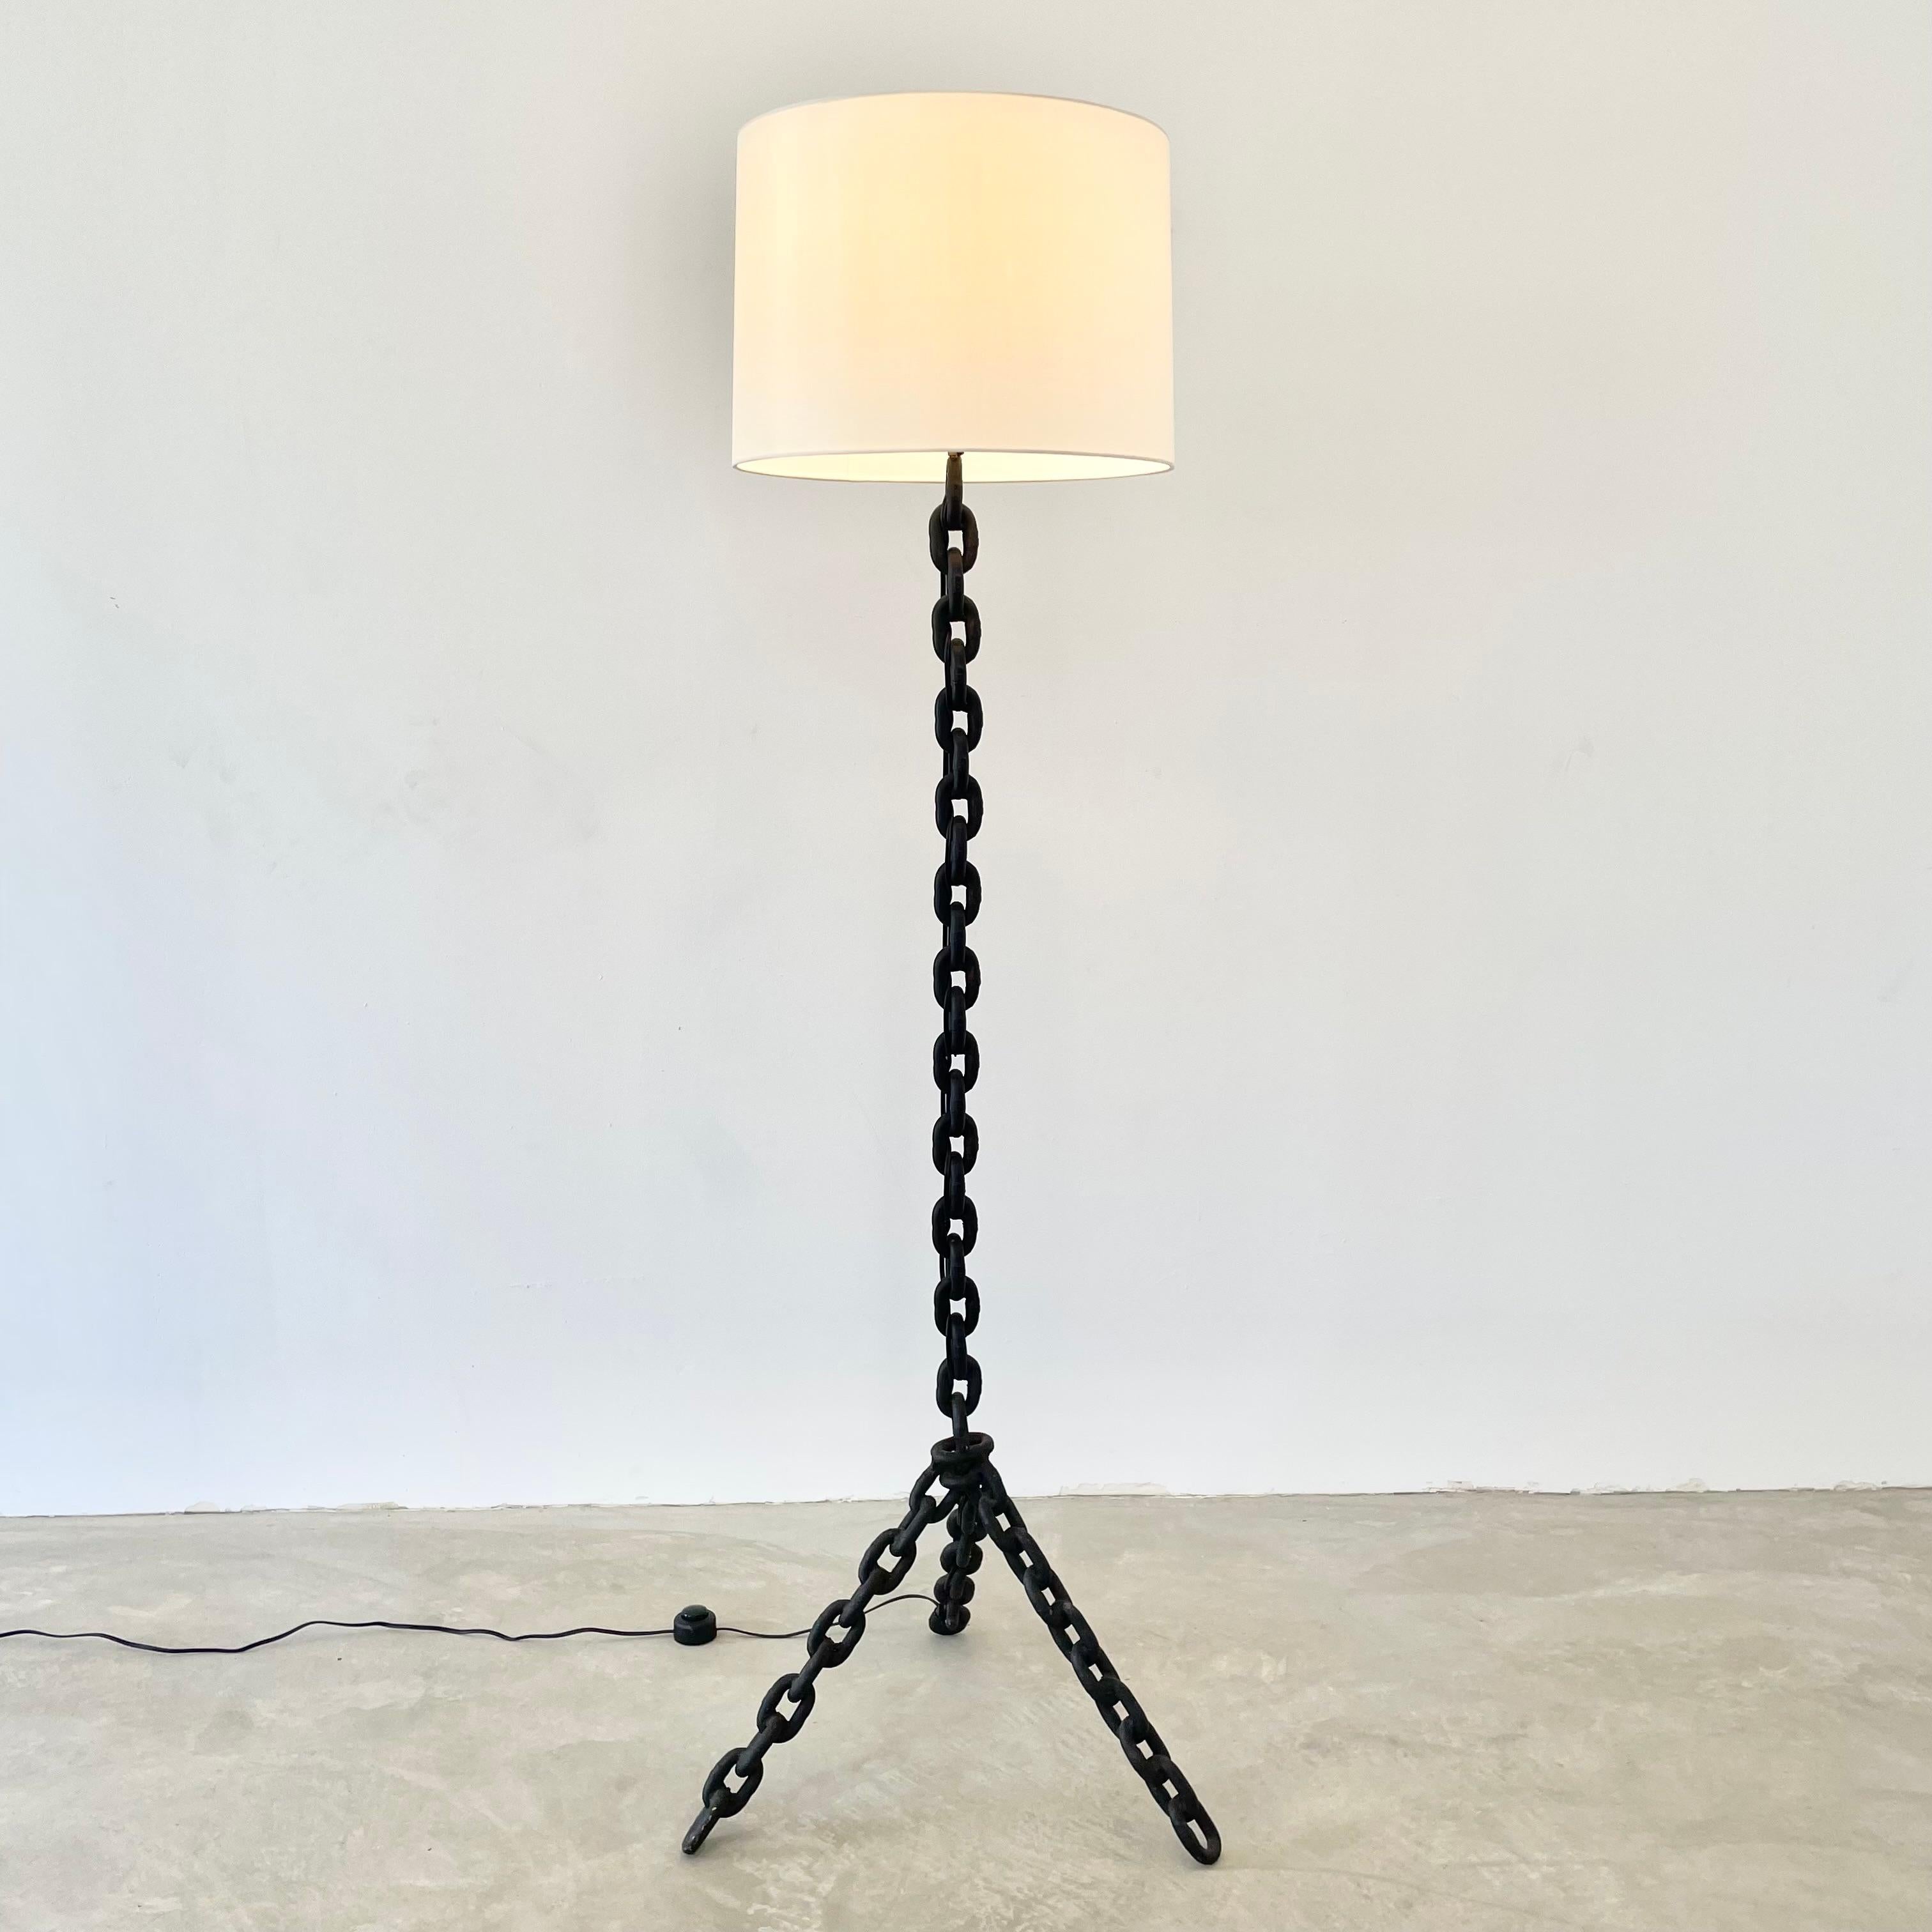 Brutalist iron chain link floor lamp, made in 1960s France. Just over 5 feet tall. Extremely heavy and substantial lamp. Tripod base with rustic iron boat chain welded together and painted in a matte black. Features a new custom silk shade with